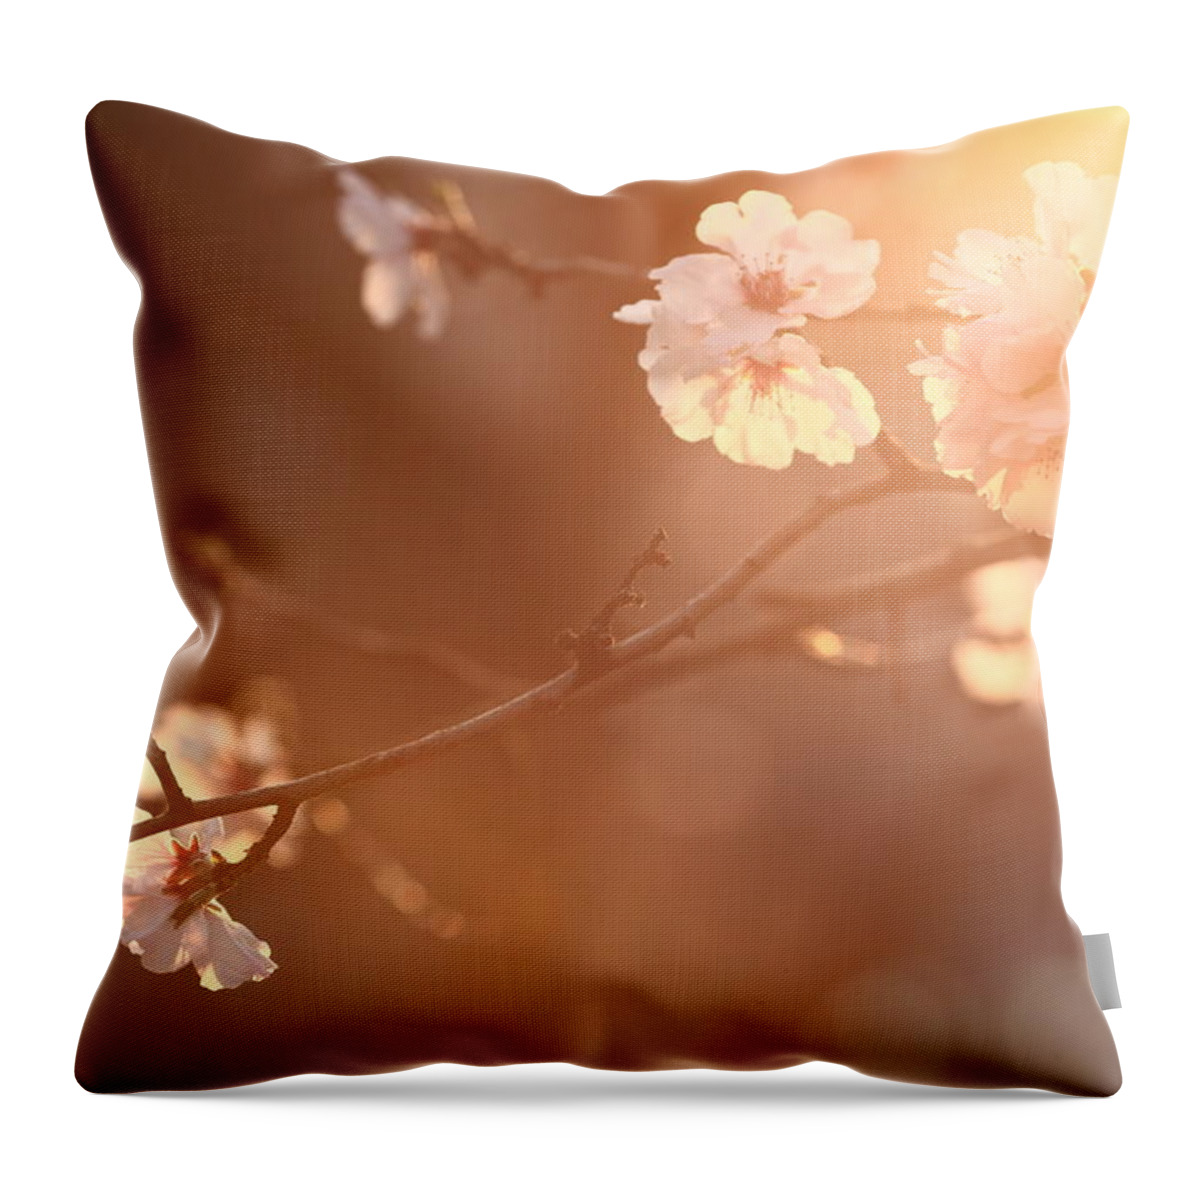 Petal Throw Pillow featuring the photograph Cherry Blossom by Rolfo Rolf Brenner